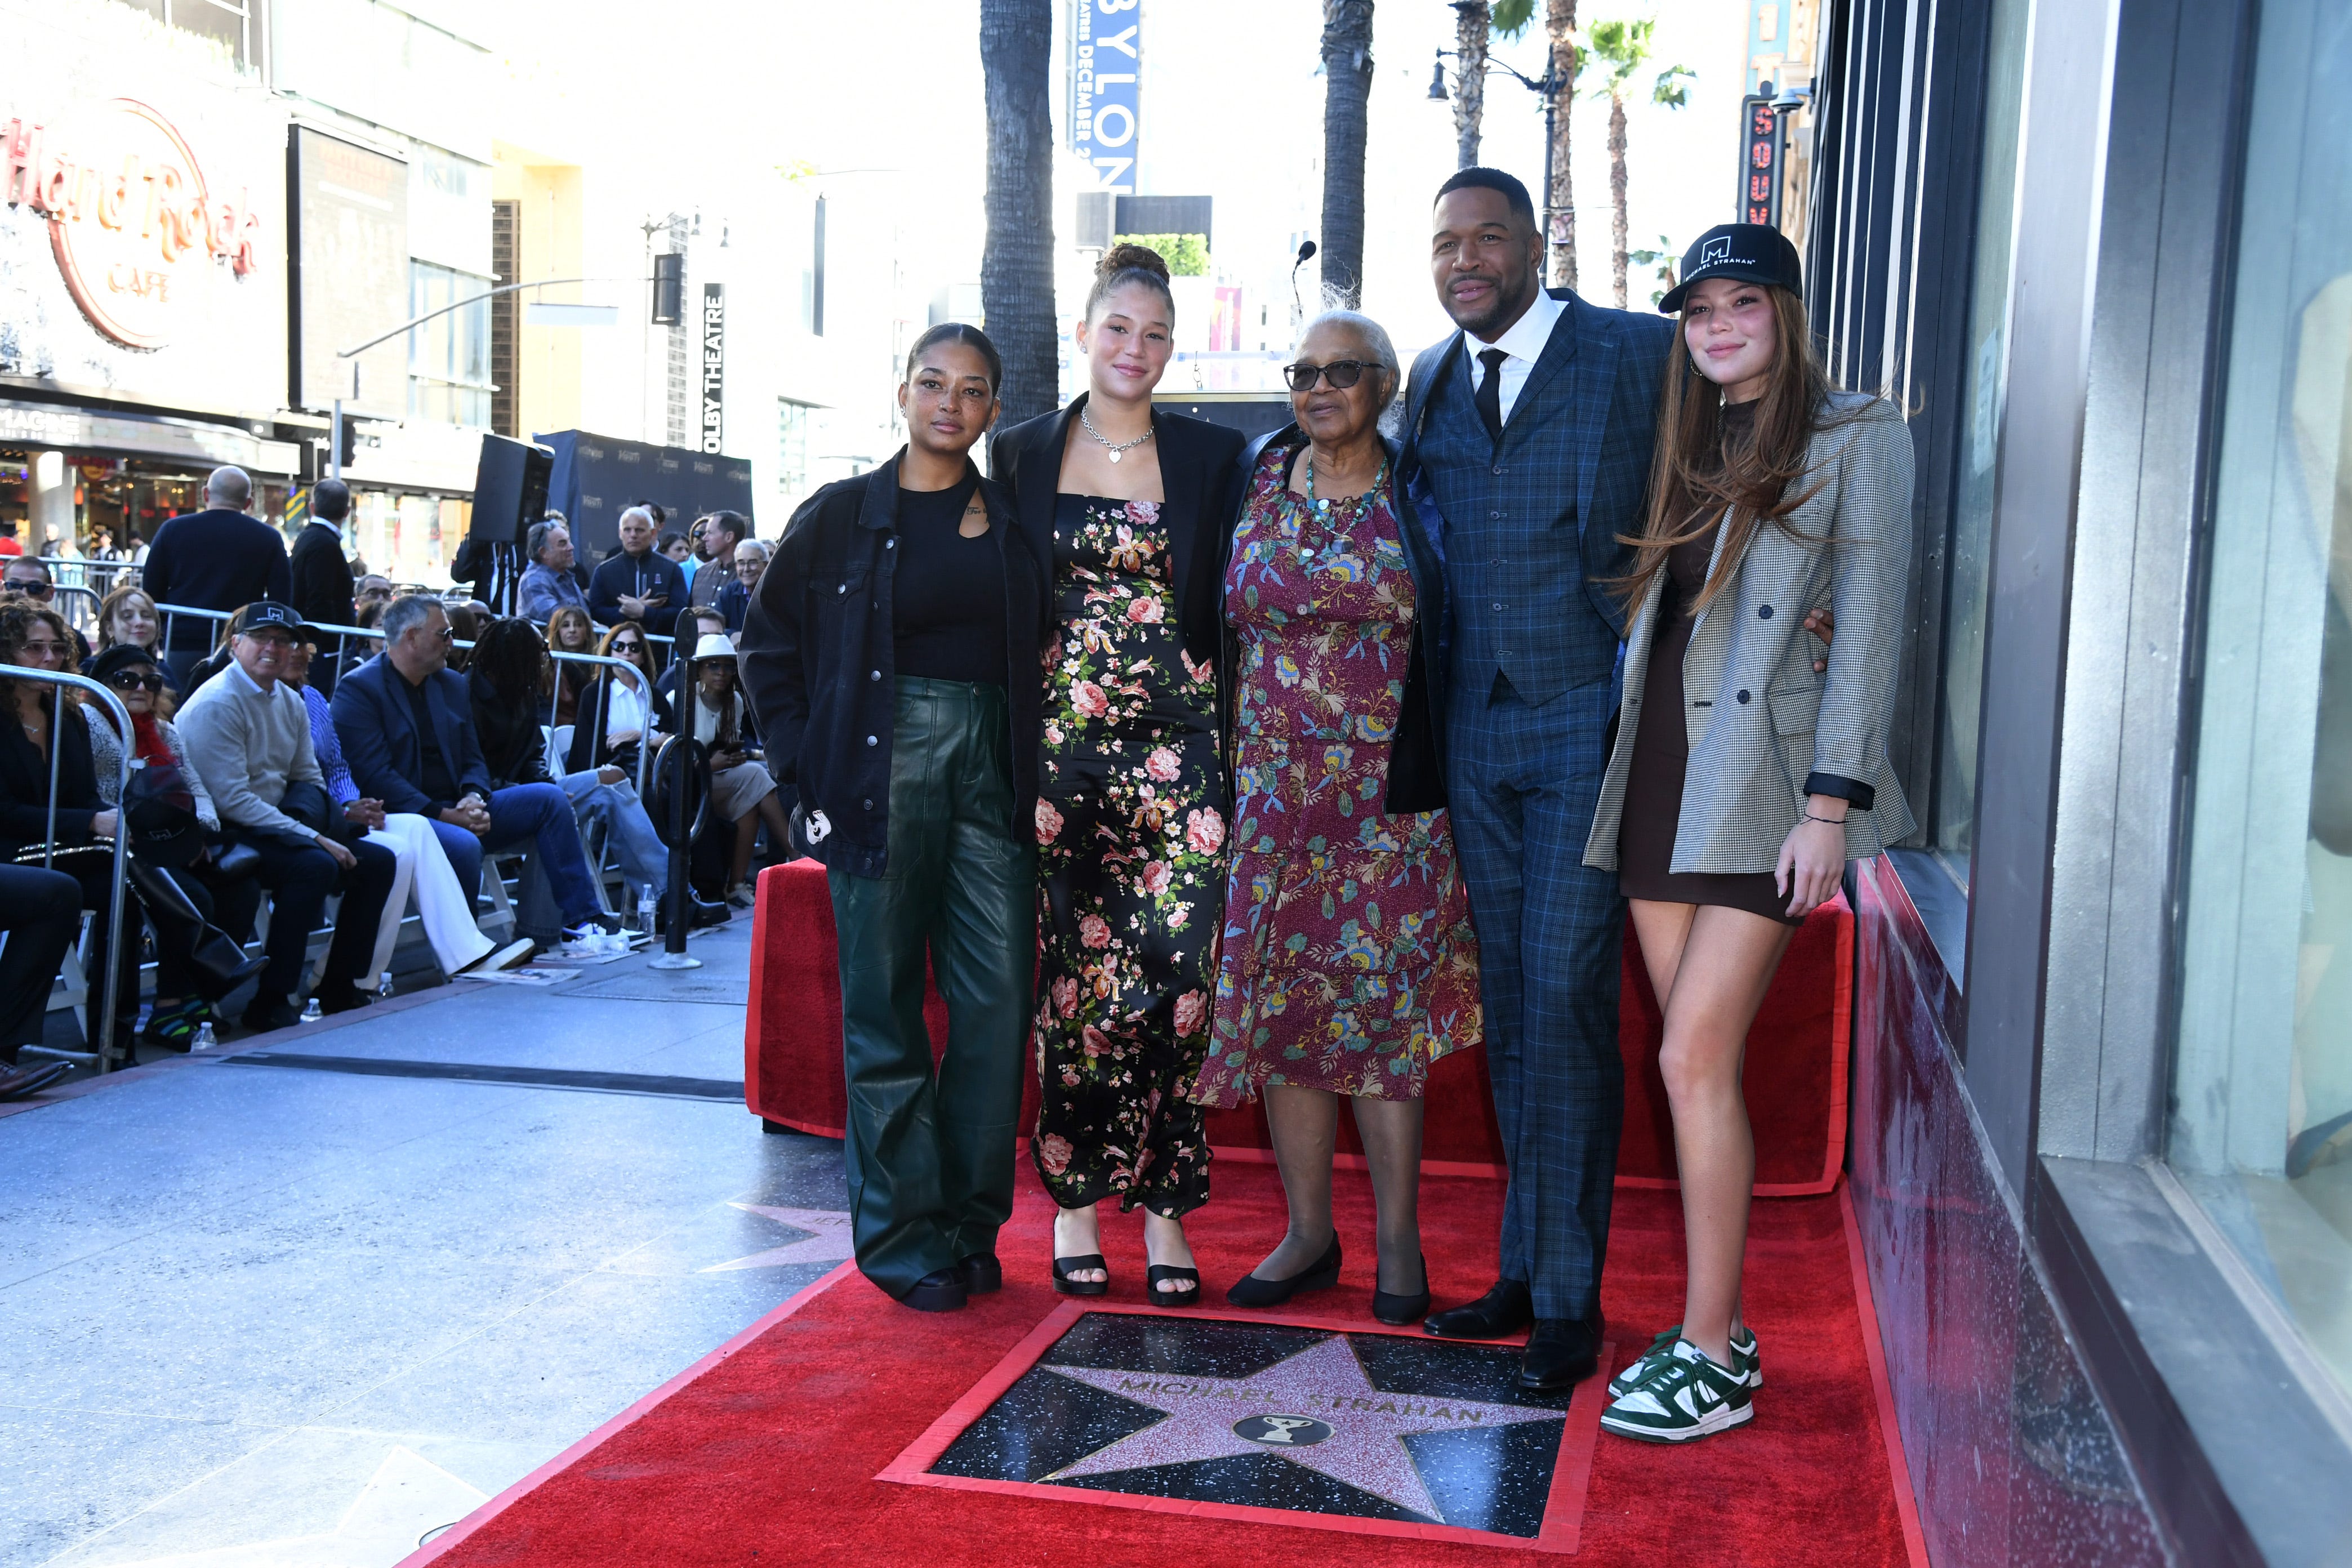 The Strahan family also came out to support him. Strahan sent his thanks to all of those who have supported him along his career<a href="https://www.instagram.com/p/Cnxs6wMP_Vx/"> on Instagram writing,</a> "Many people have been there with me along the way, and I am tremendously grateful to you all. I'm just having fun, and when you have fun and work hard... Anything is possible."